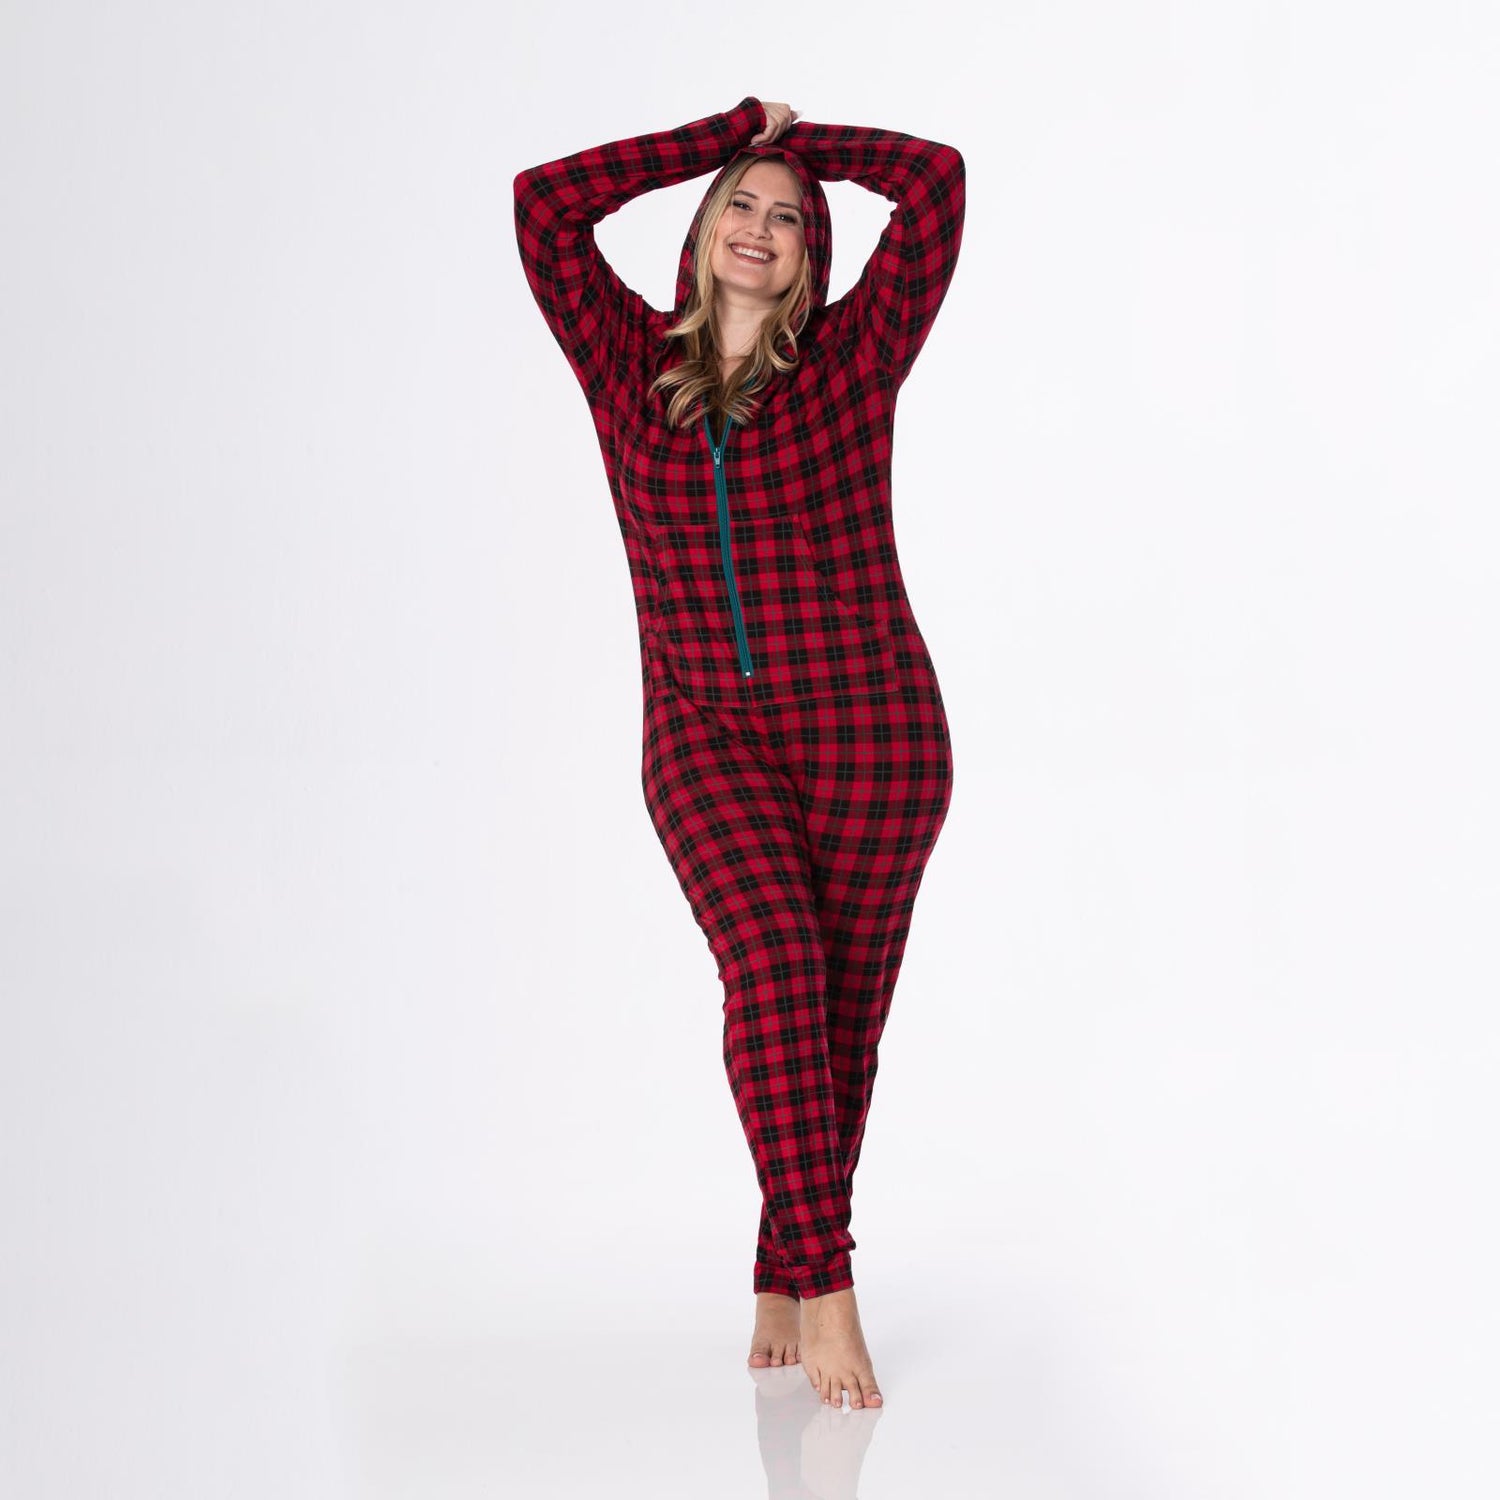 Women's Print Long Sleeve Jumpsuit with Hood in Anniversary Plaid